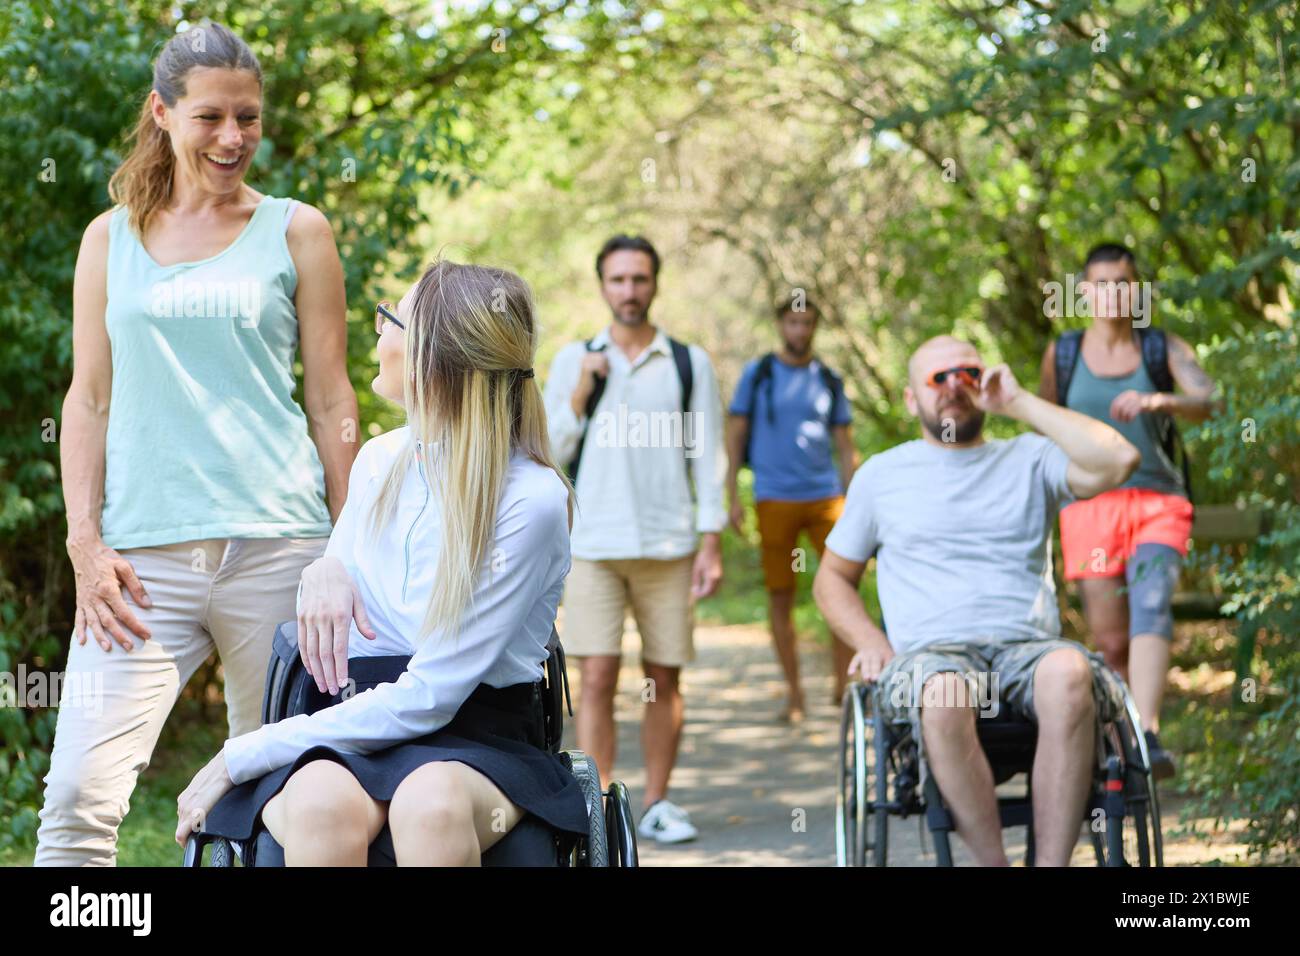 A diverse group of friends in a park setting, featuring two persons using wheelchairs and a woman with a knee prosthetic, showcasing inclusion and acc Stock Photo